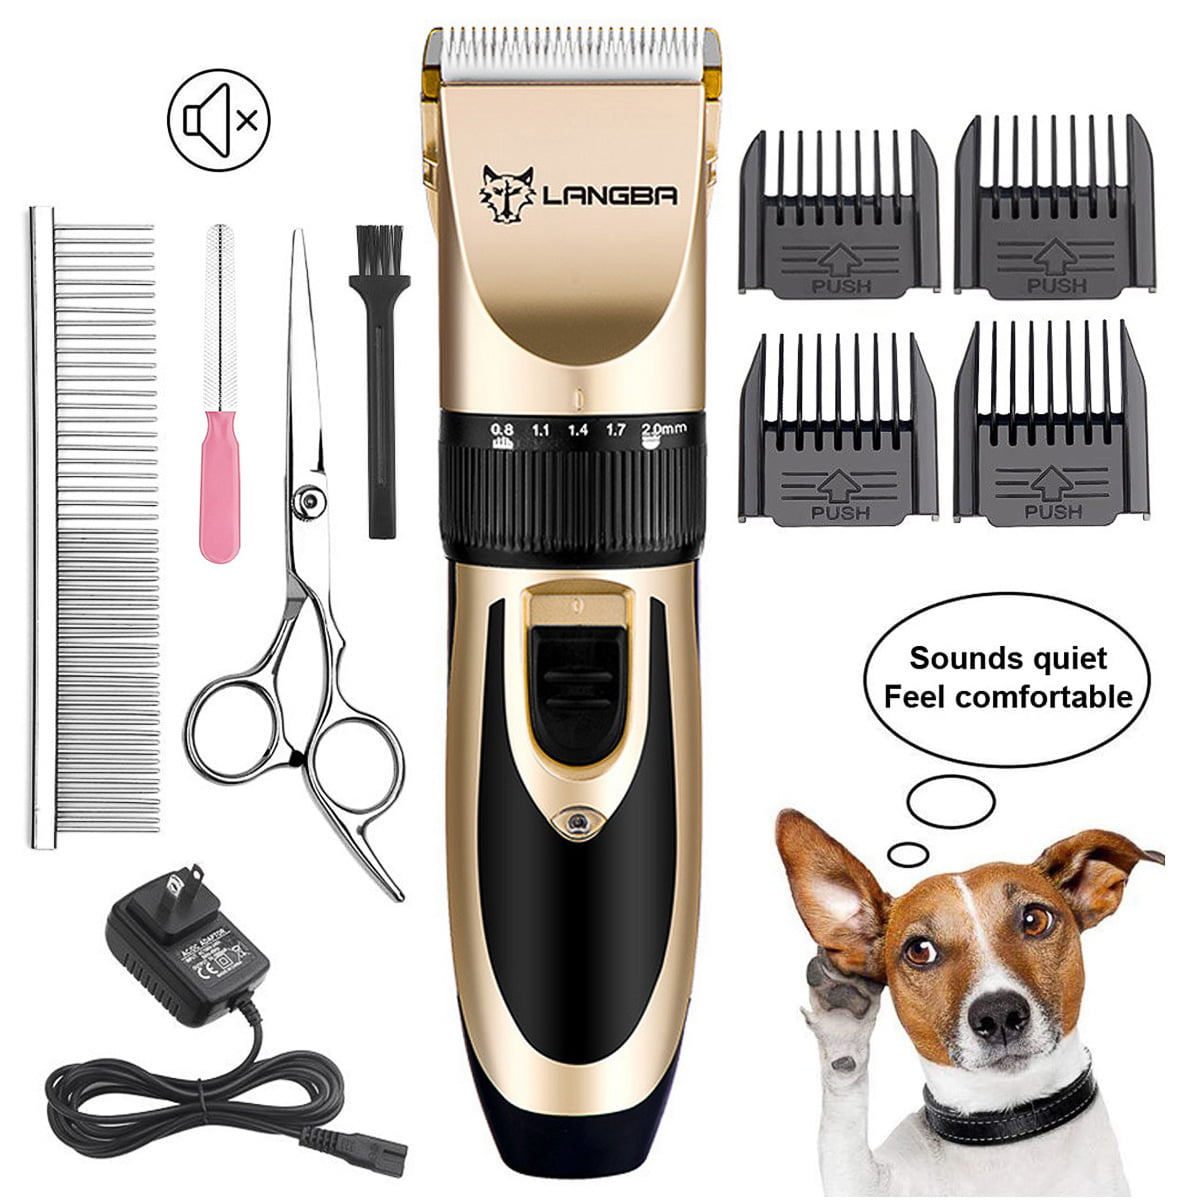 Dog Clippers, Upgraded Dog Grooming Clippers Dog Hair